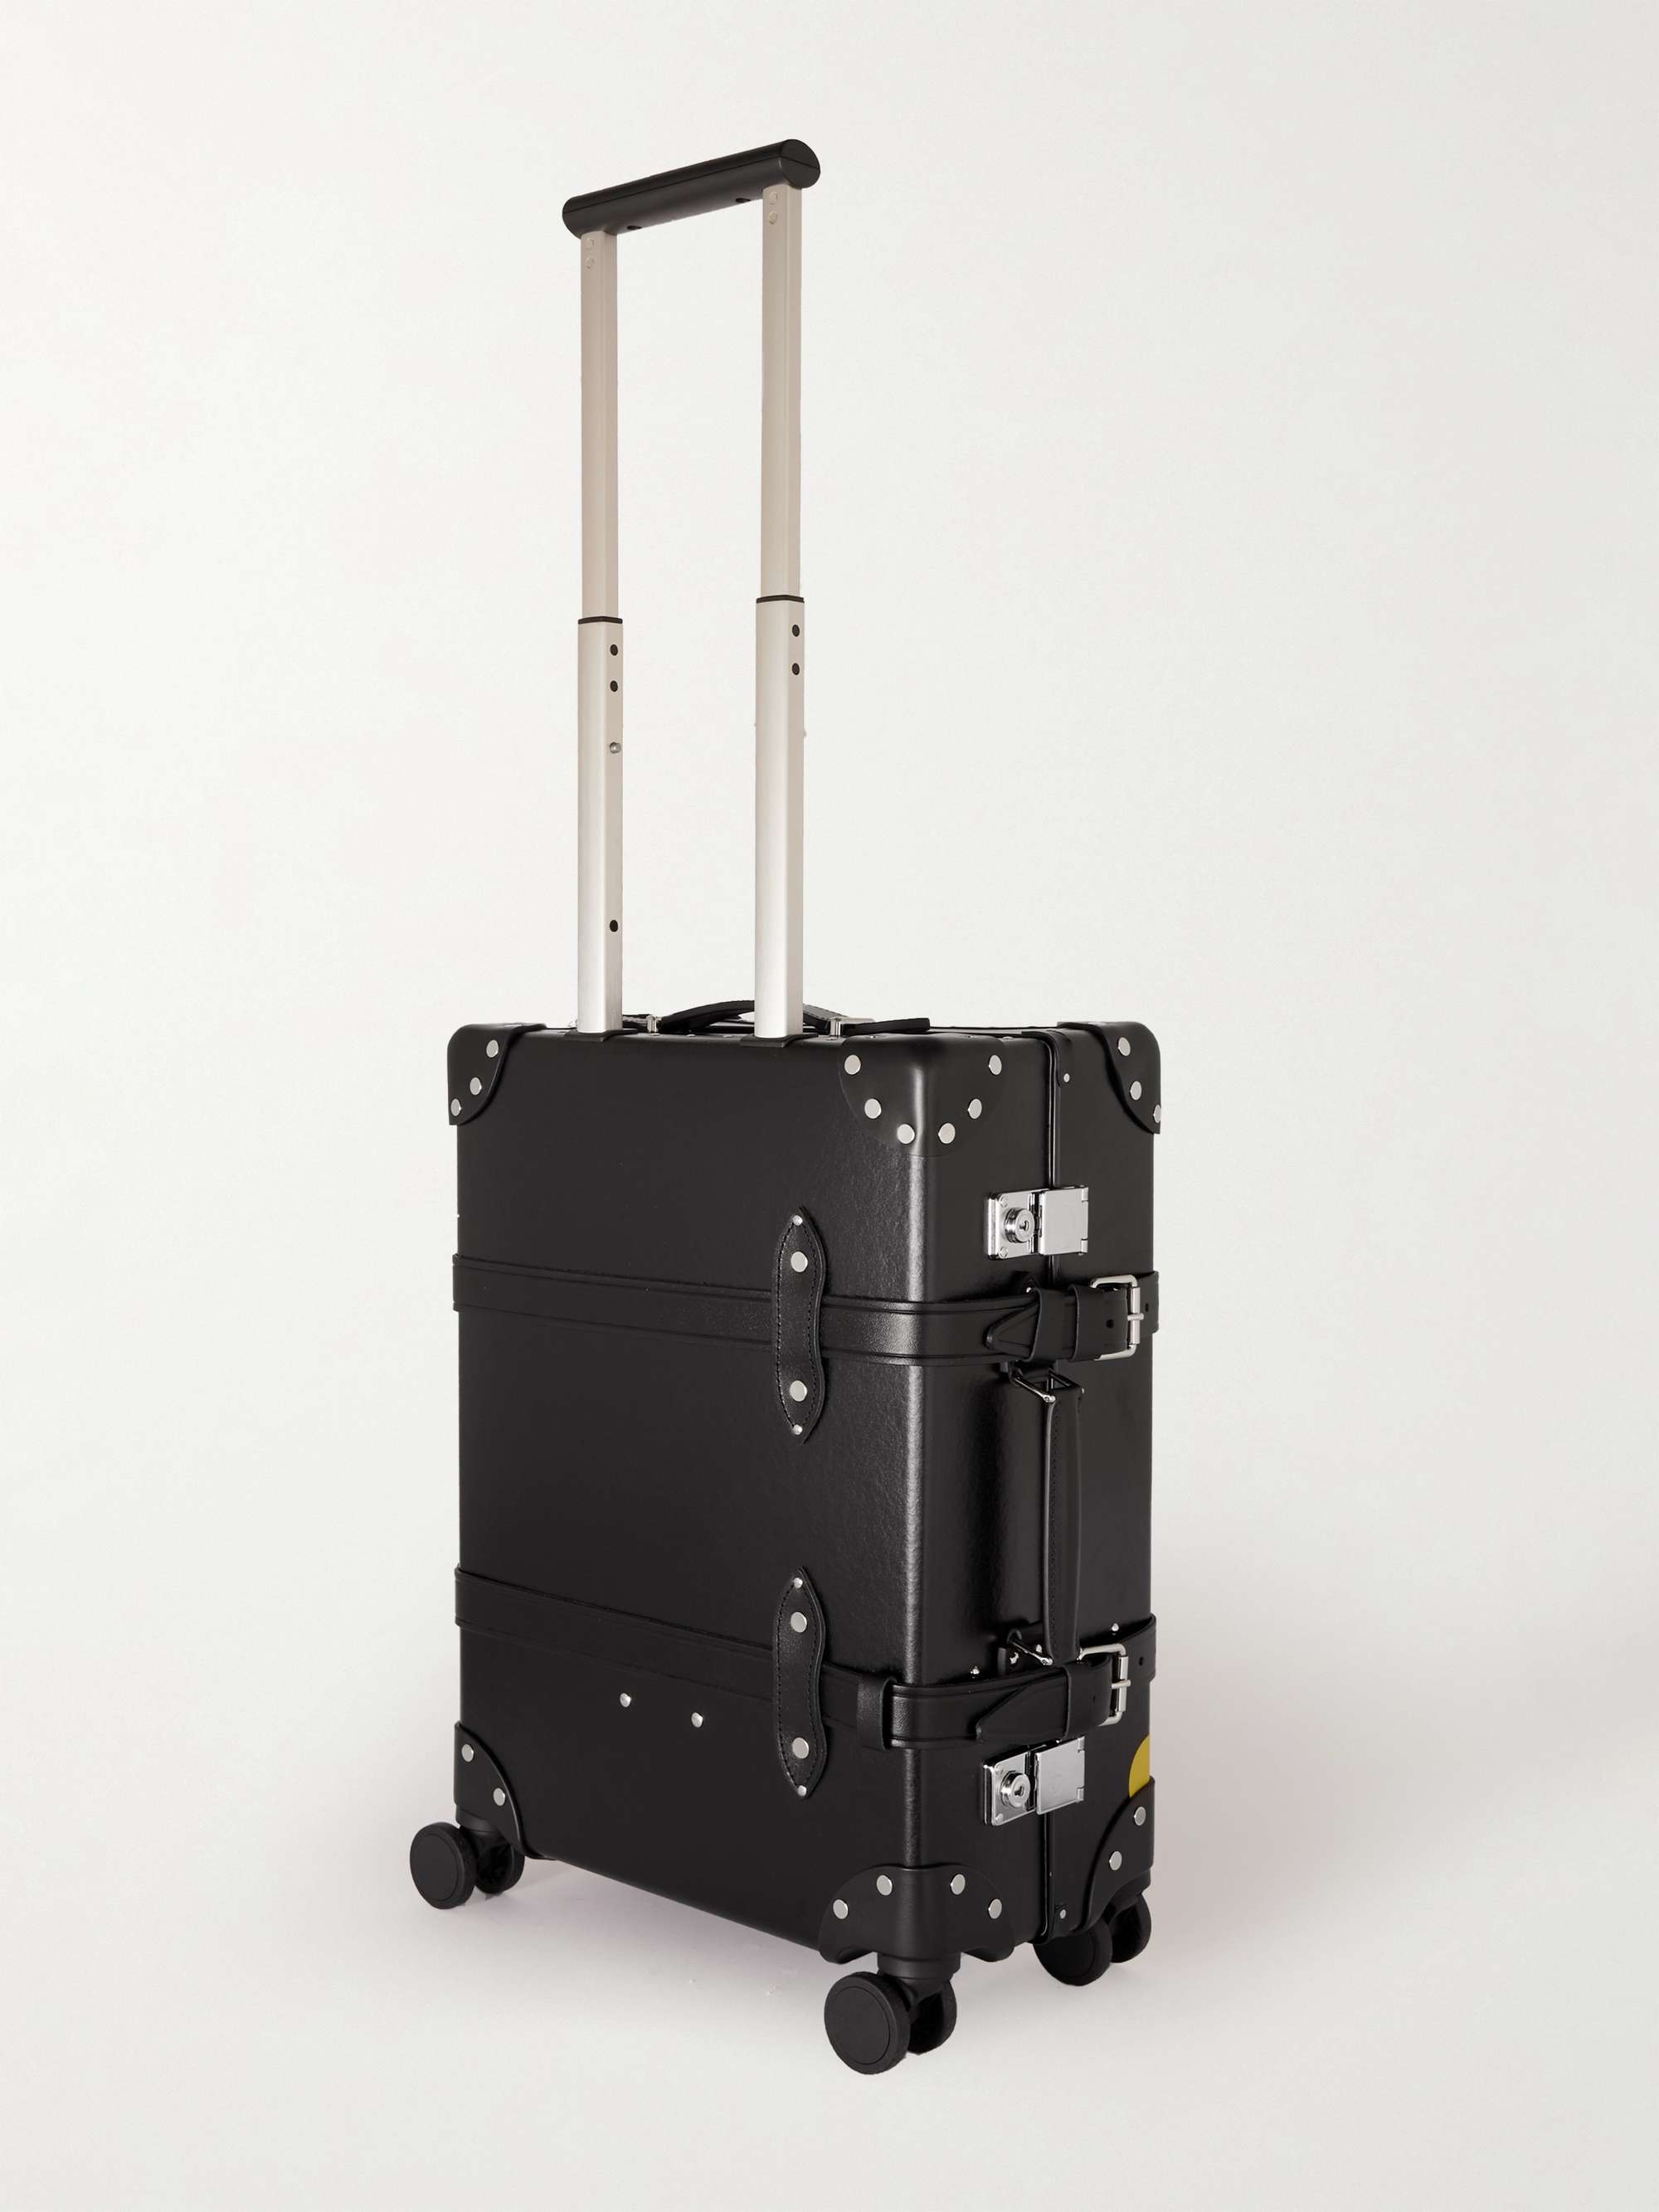 GLOBE-TROTTER + Dr. No Printed Carry-On Leather-Trimmed Trolley Suitcase